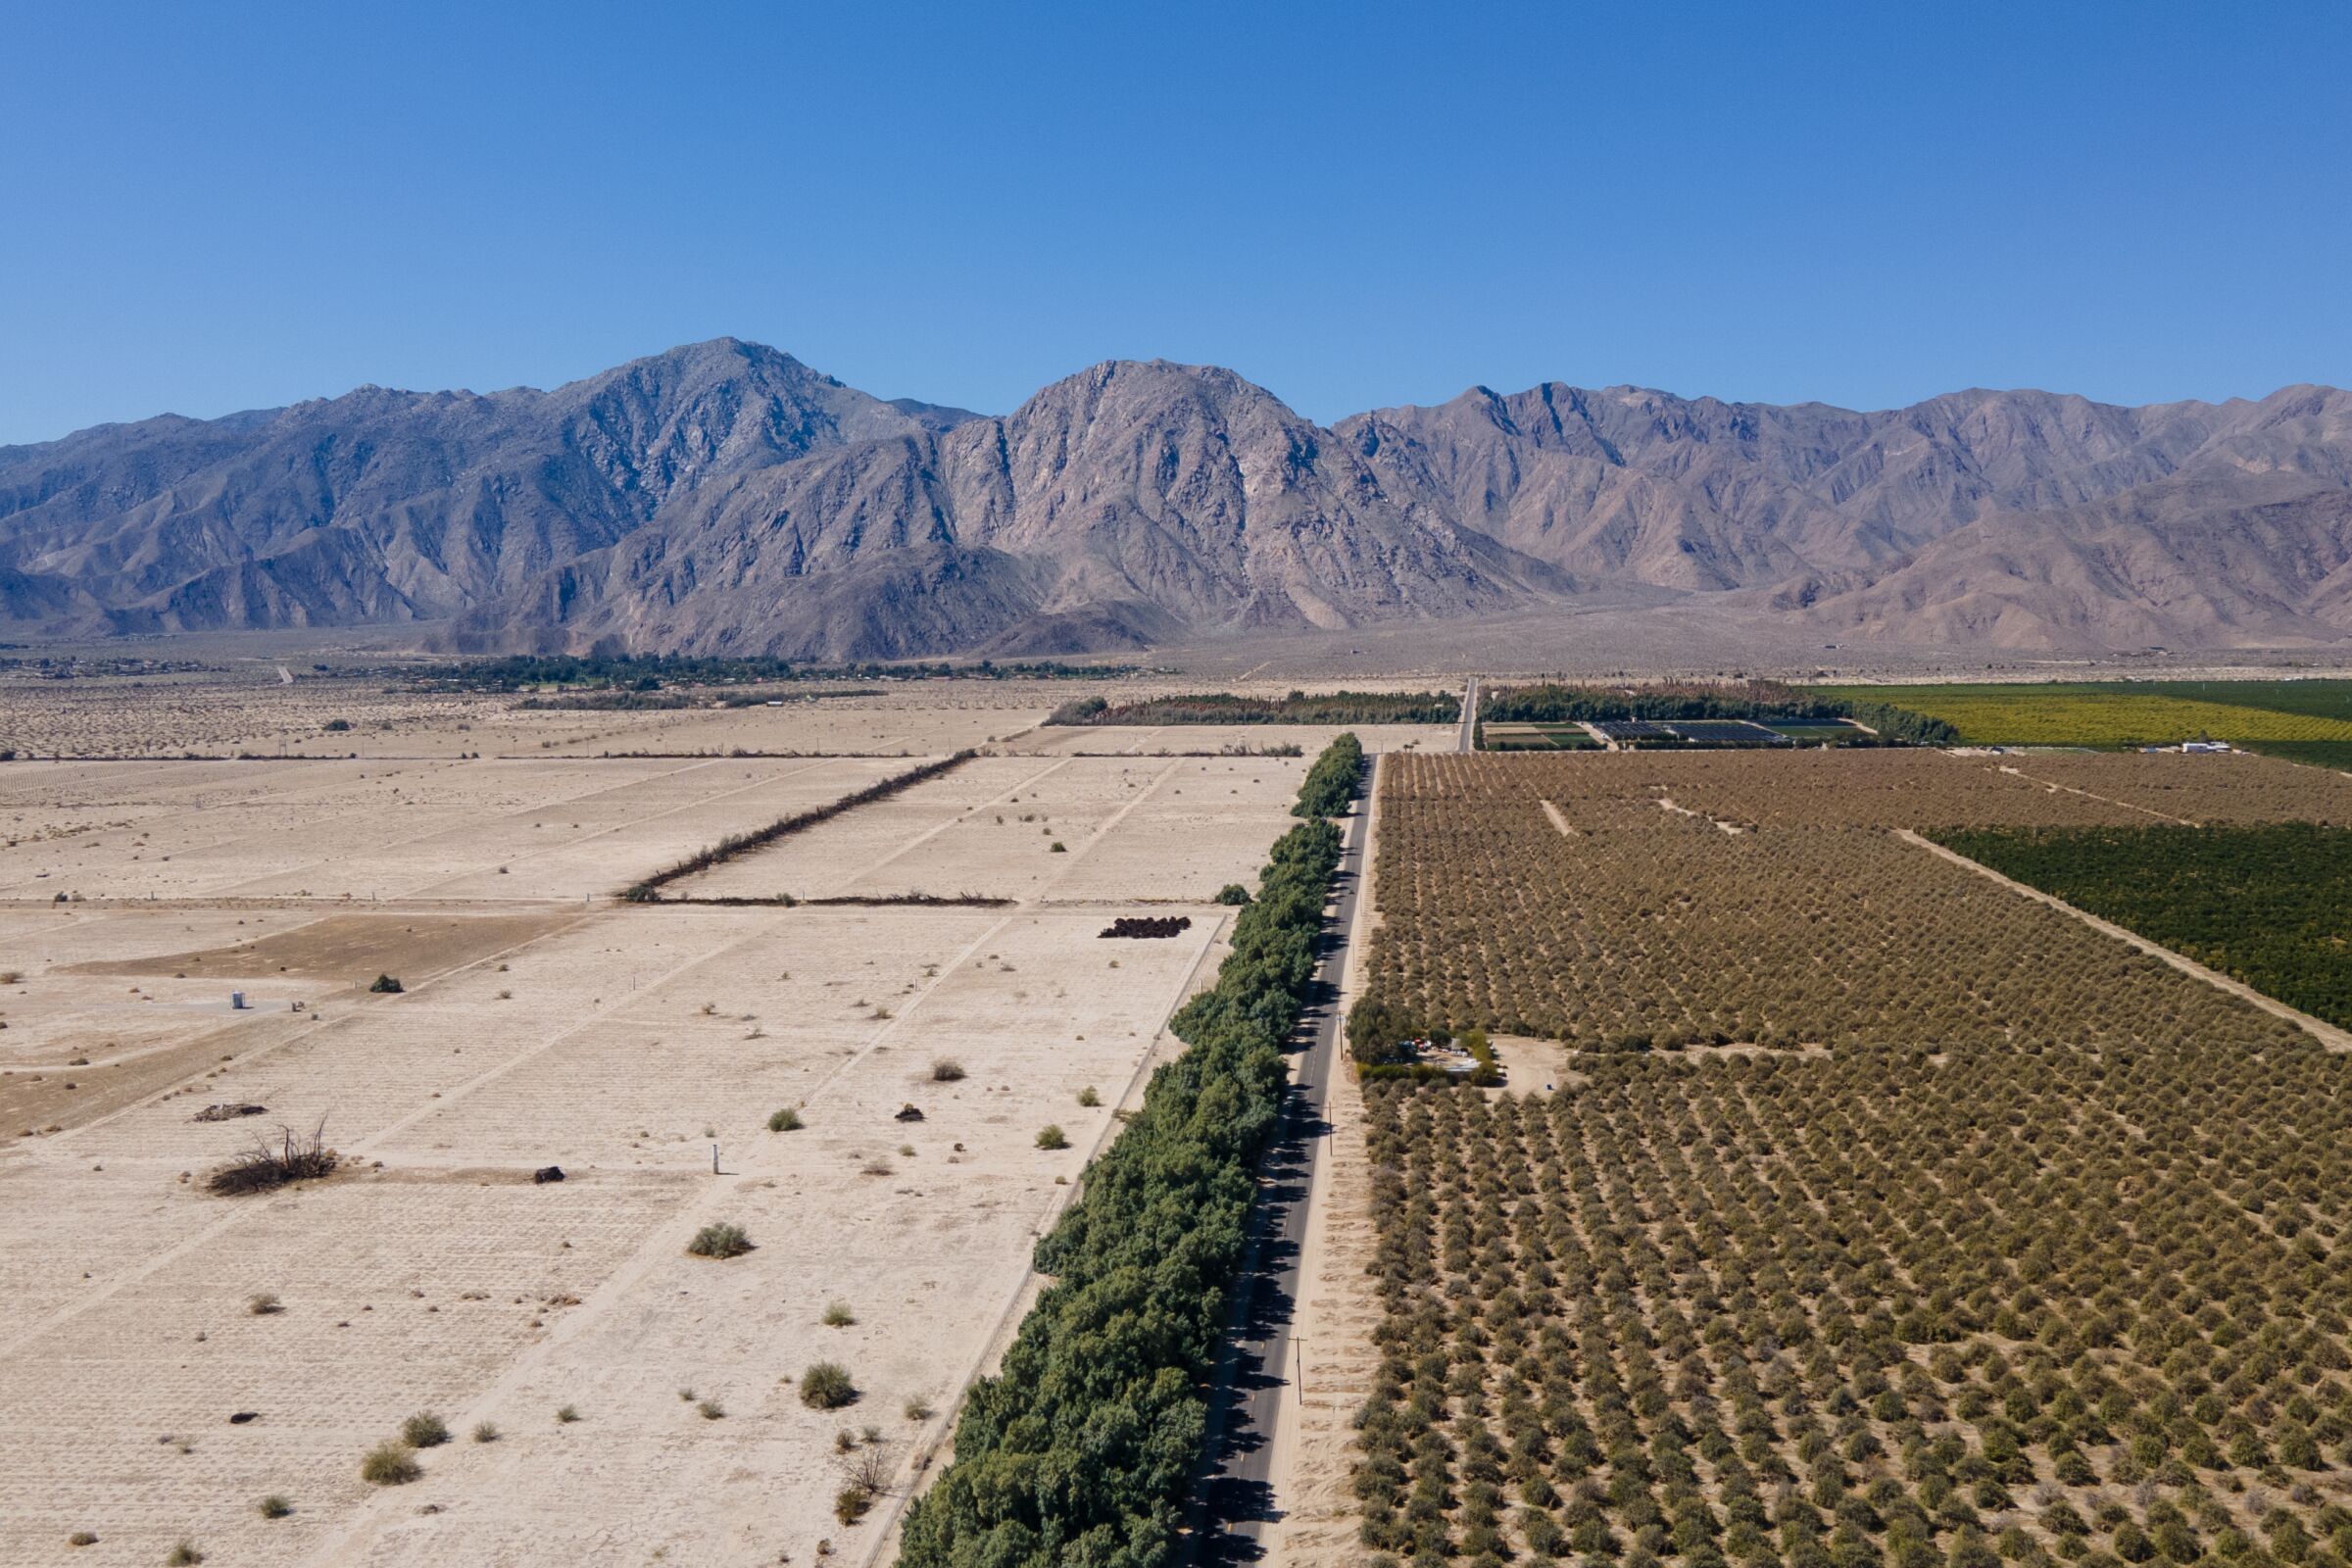 Tamarisk flourish separating a citrus grove and dryer landscape on Tuesday, March 8, 2022 in Borrego Springs, CA.